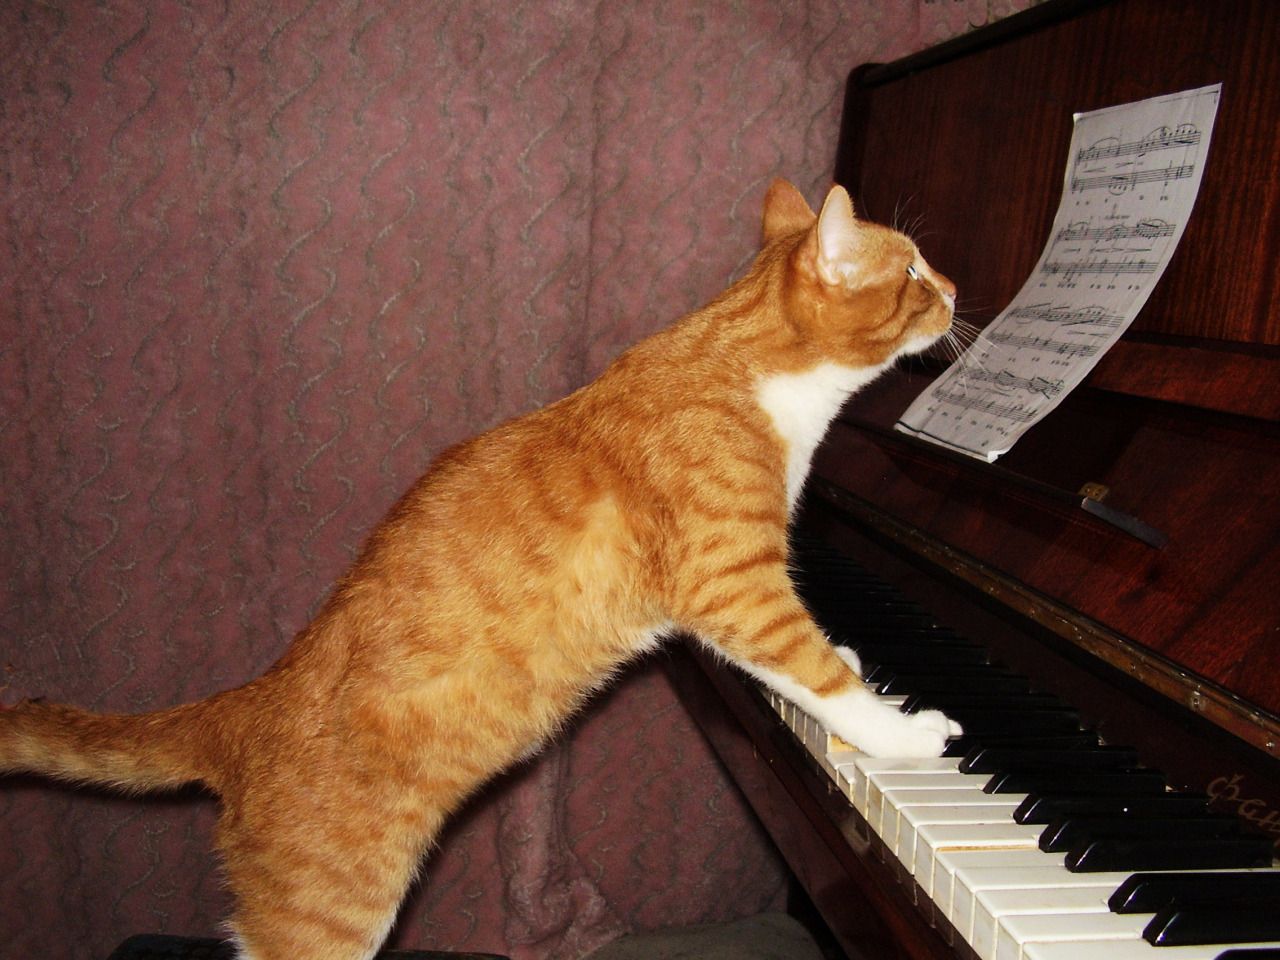 mostlycatsmostly:
“ (via super-foto-666)
”
“There are two means of refuge from the miseries of life: music and cats.” - Albert Schweitzer